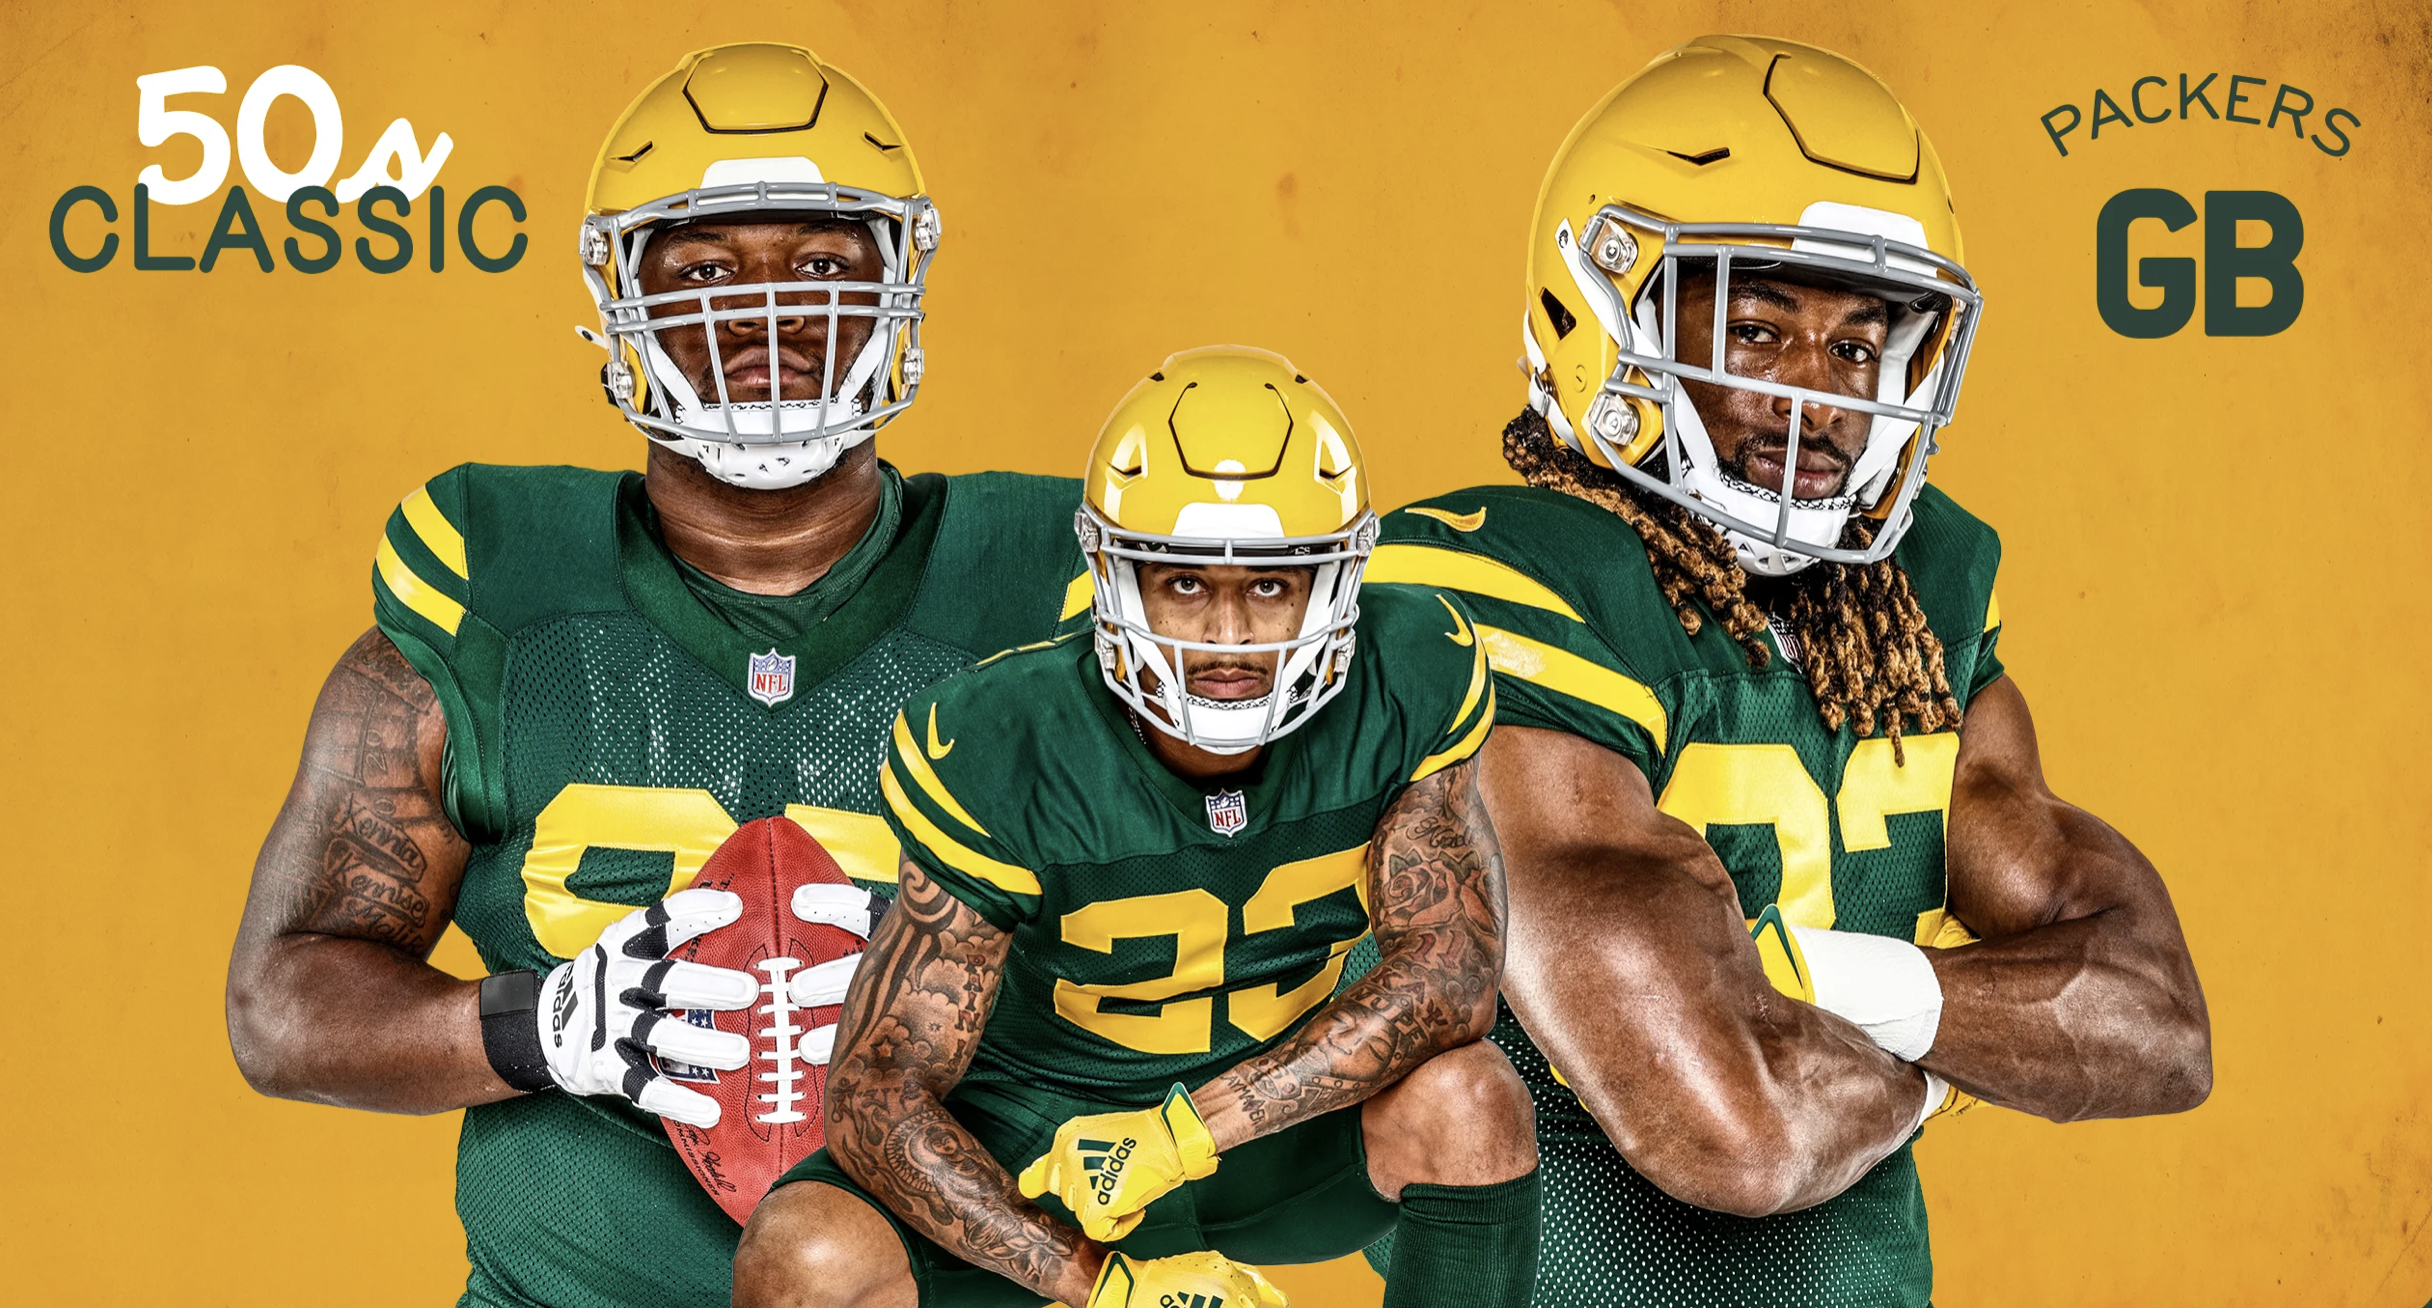 Packers unveil 1950s-style classic uniforms to be worn in 2021 season,  replacing navy and gold throwback 